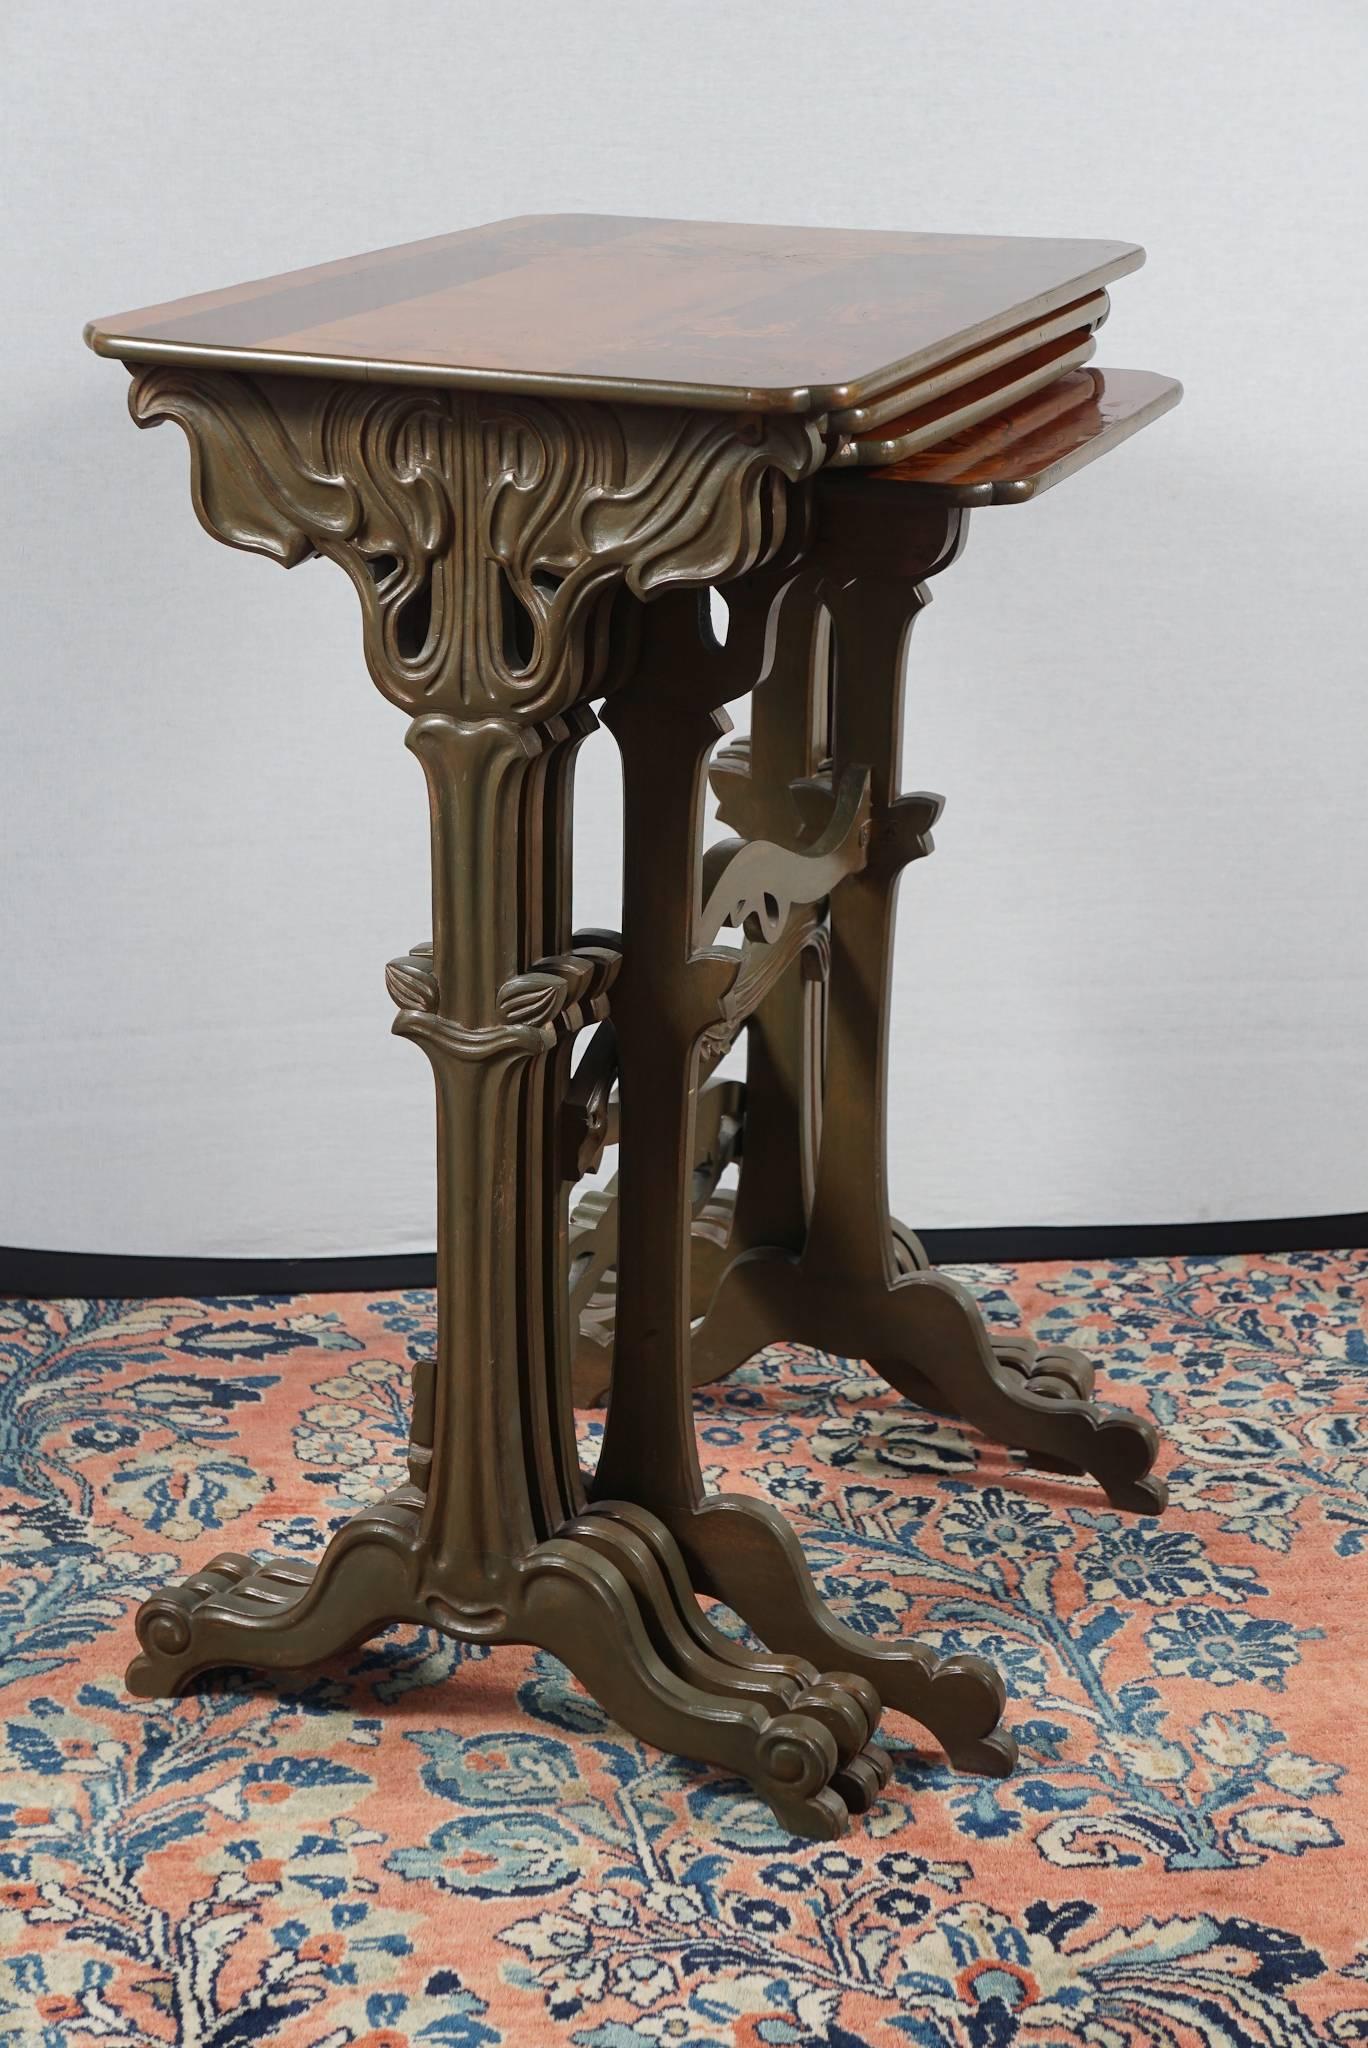 Fruitwood Emil Gallé French Art Nouveau Nesting Tables, circa 1900 For Sale